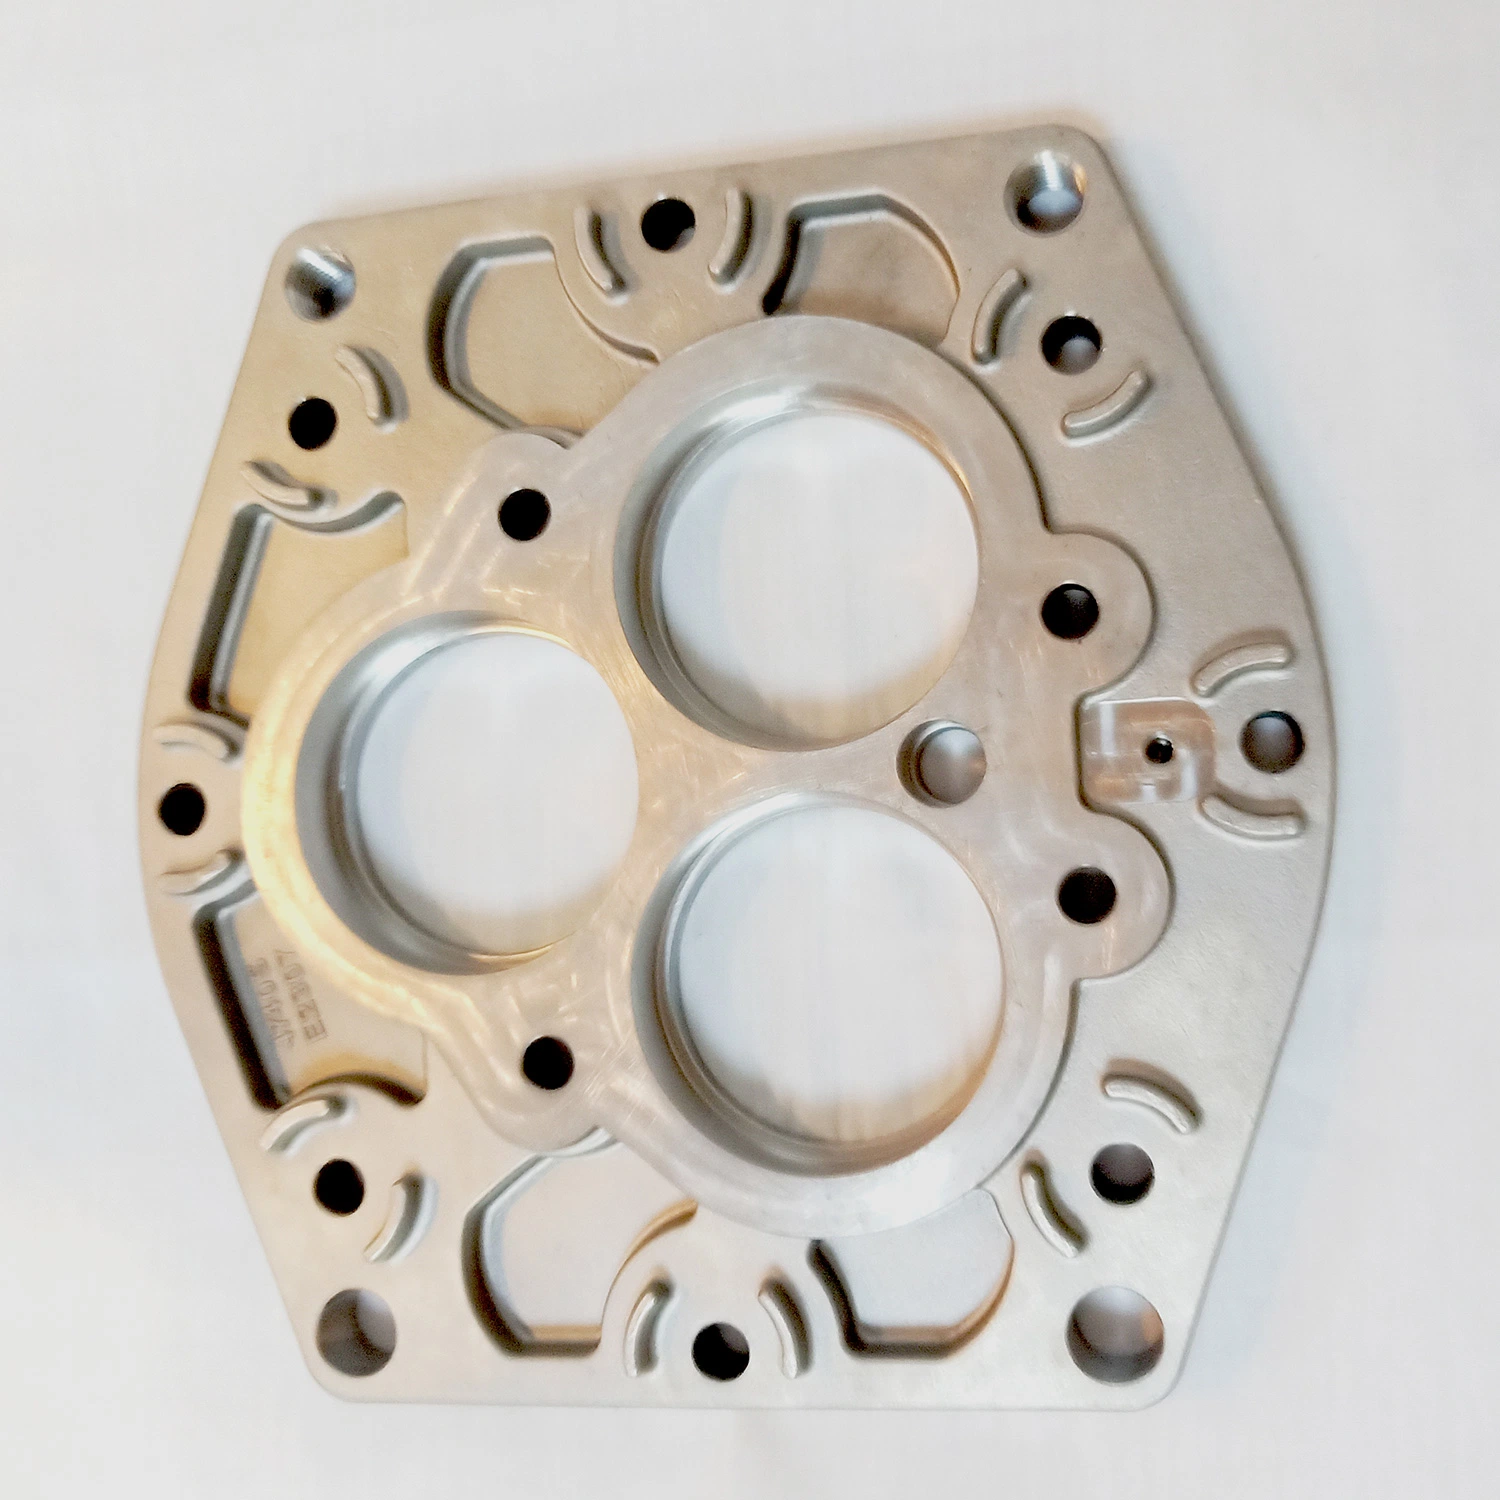 Yahao High Precision Electrical Machine Carbon Stainless Steel Investment Casting Parts